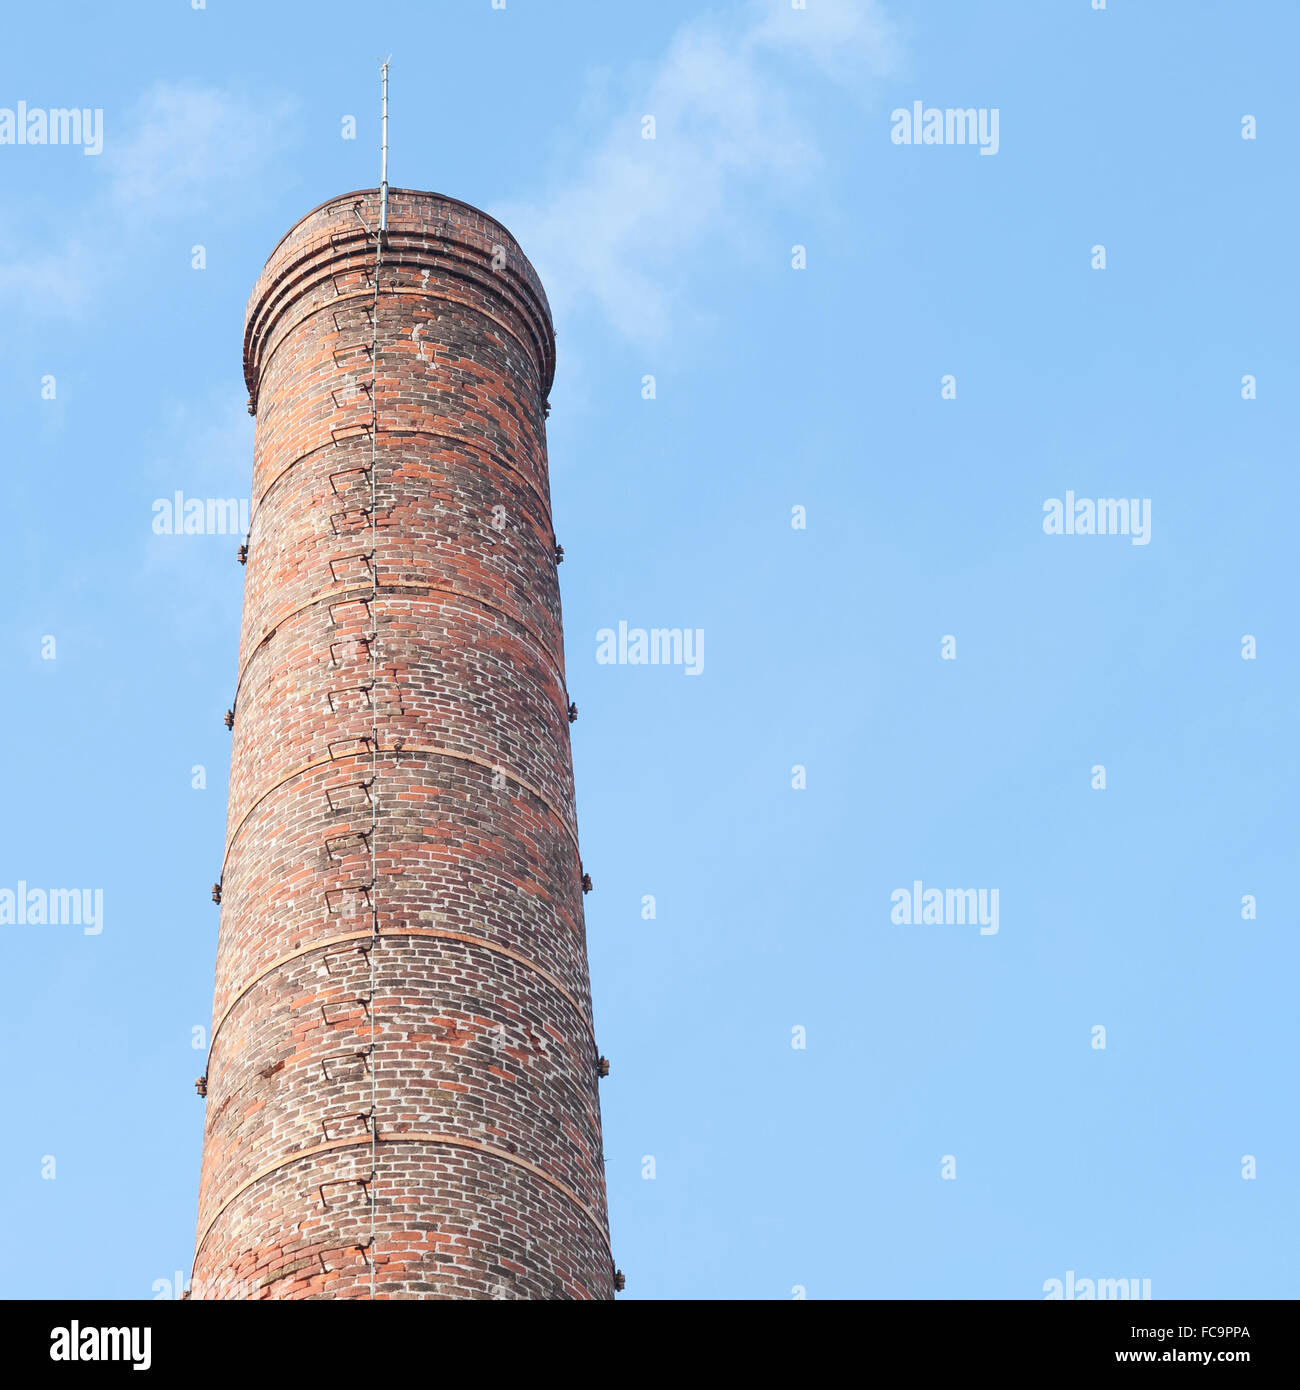 Smokestack of an old abandoned industrial complex Stock Photo